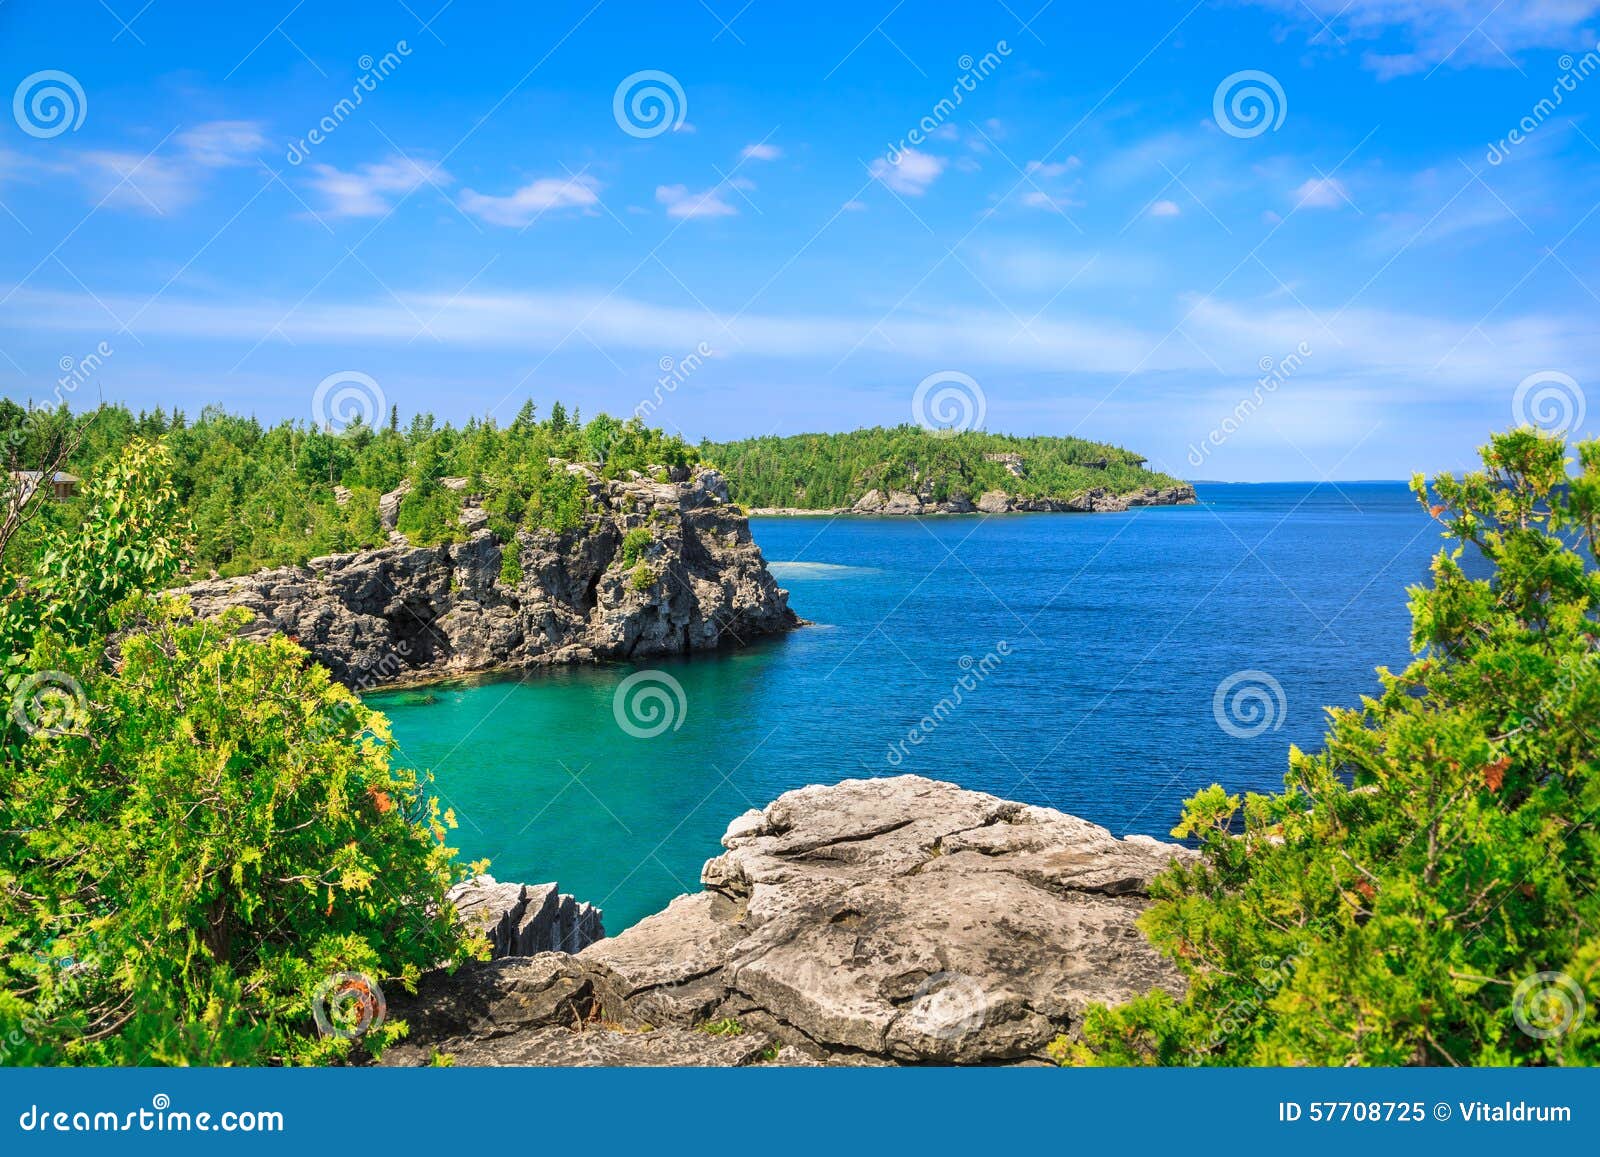 gorgeous landscape view of great inviting cyprus lake tranquil, turquoise water at beautiful bruce peninsula, ontario